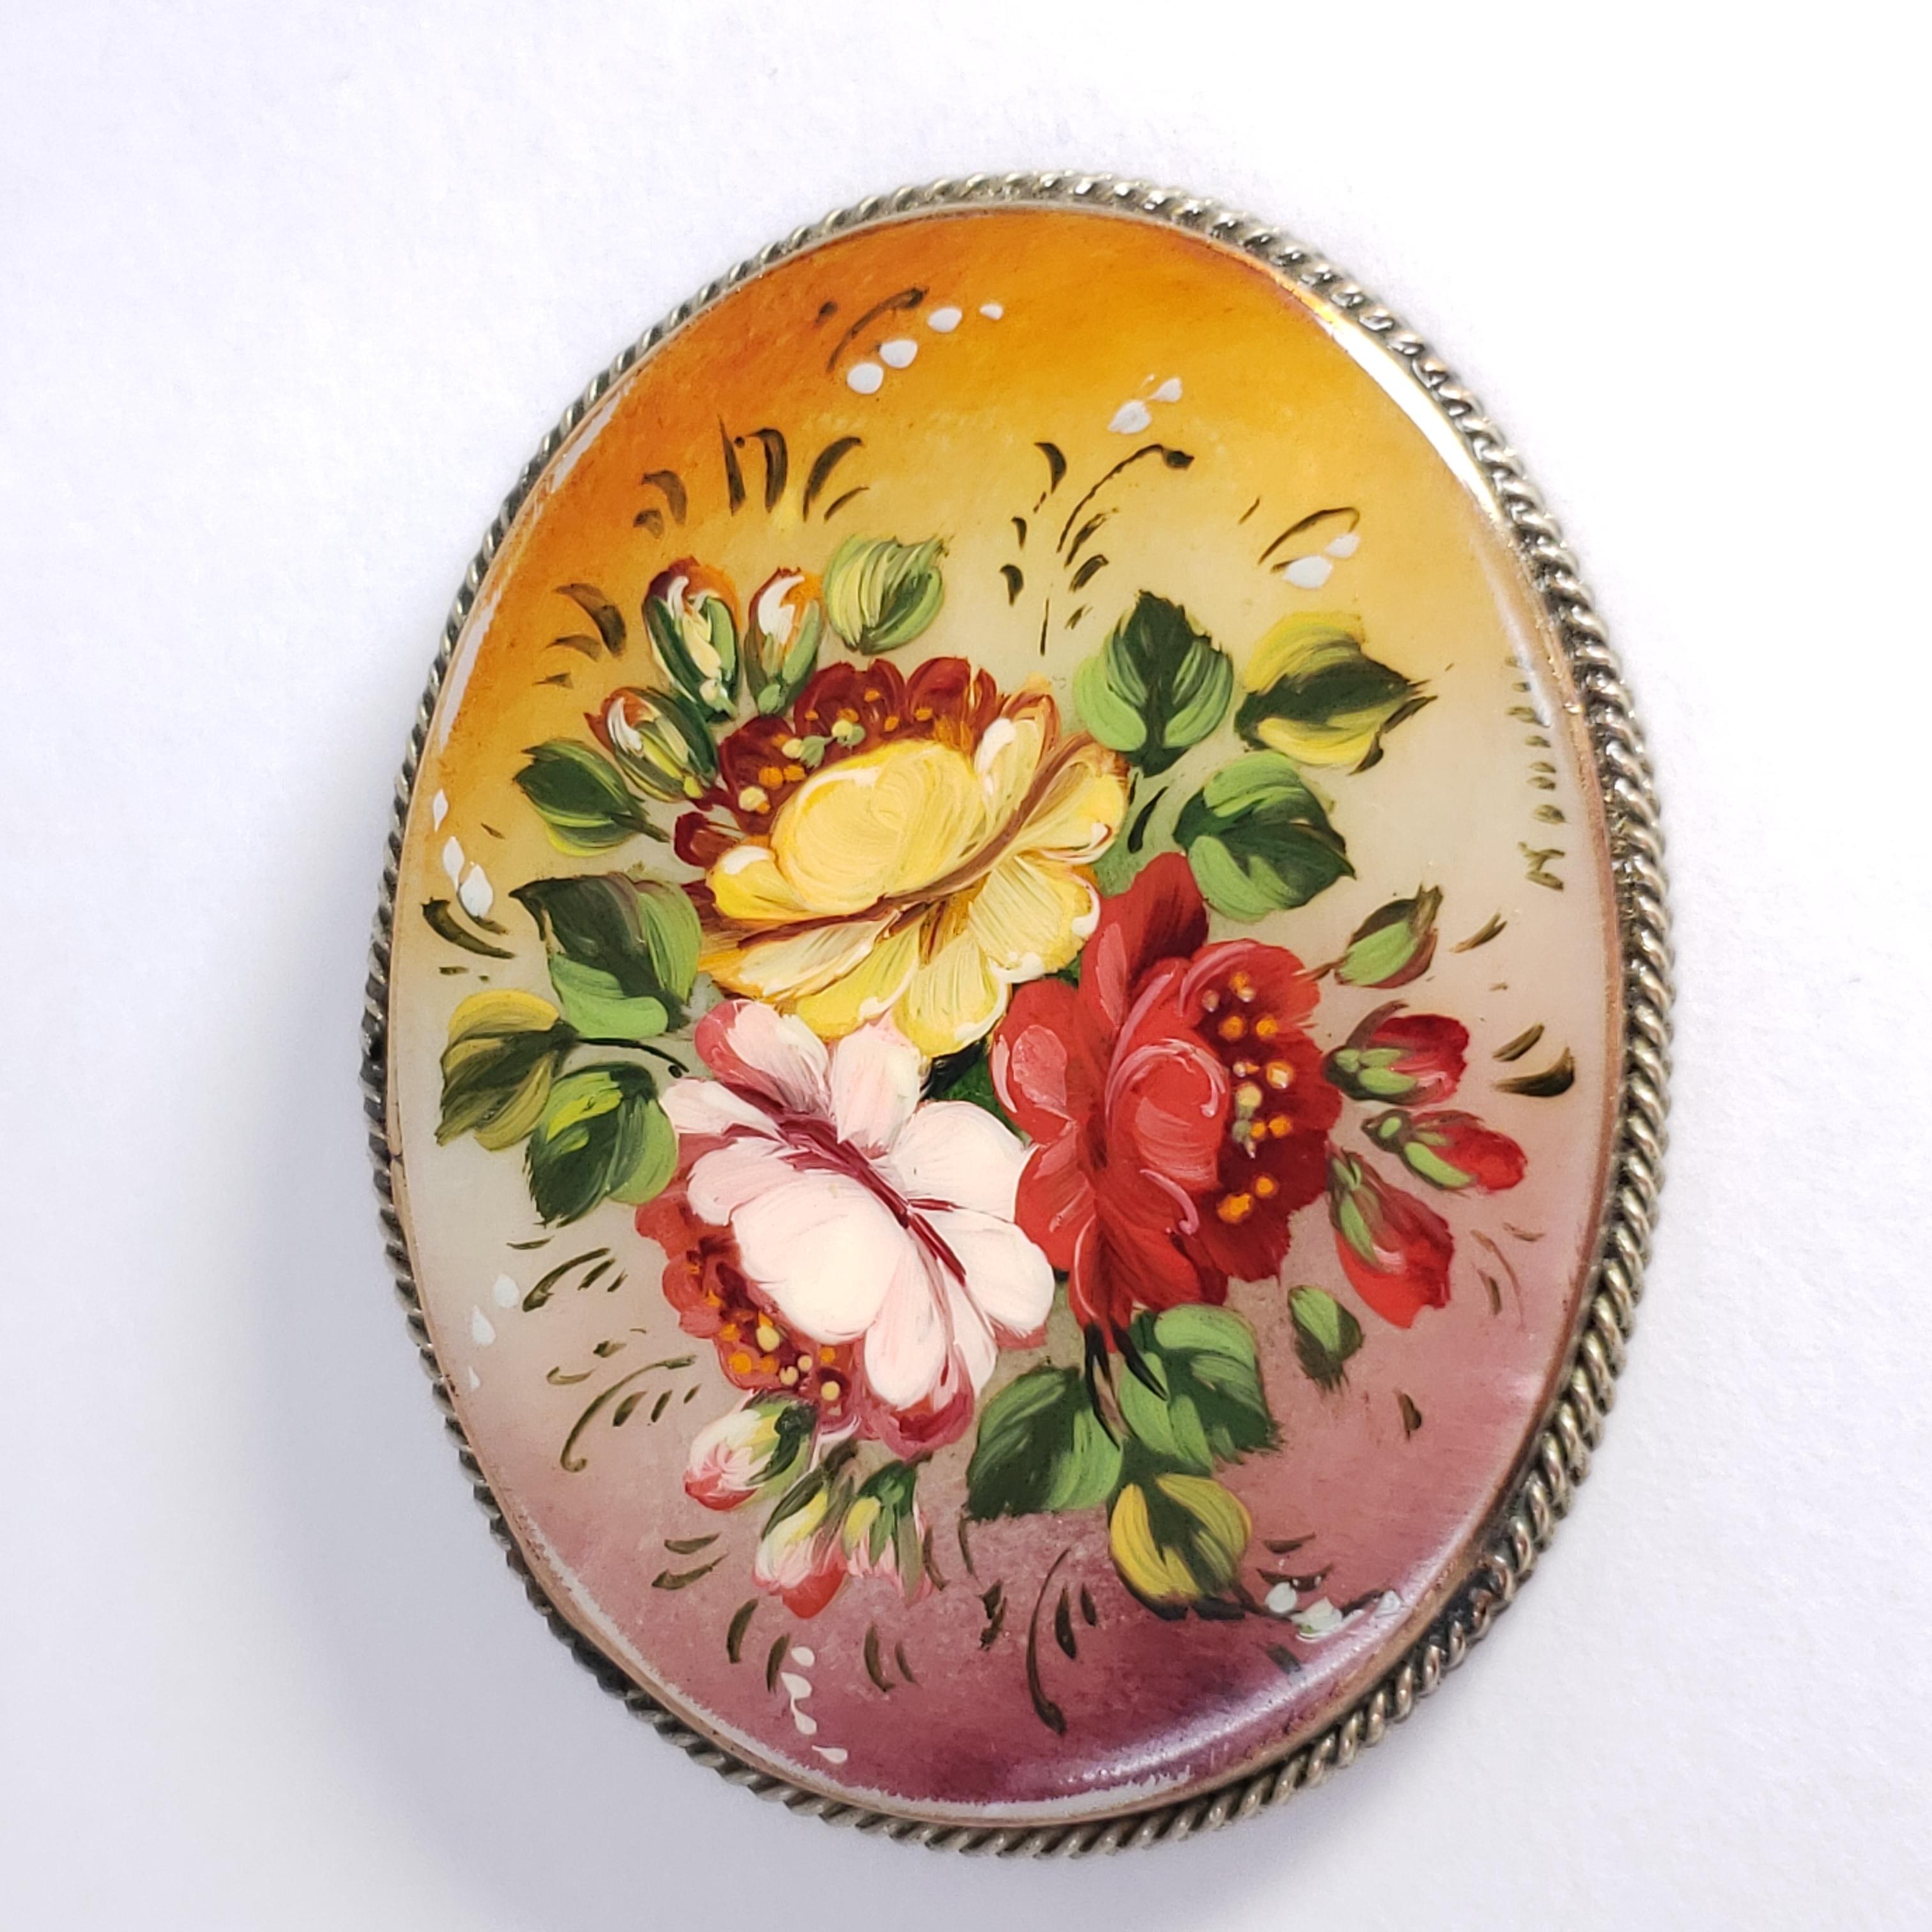 An exquisite Russian Fedoskino brooch set in a beautiful German silver bezel. Features a hand painted bouquet of bright, vibrant flowers on a mother-of-pearl stone covered with a layer of lacquer.

Signed by artist.

Circa early 1900s